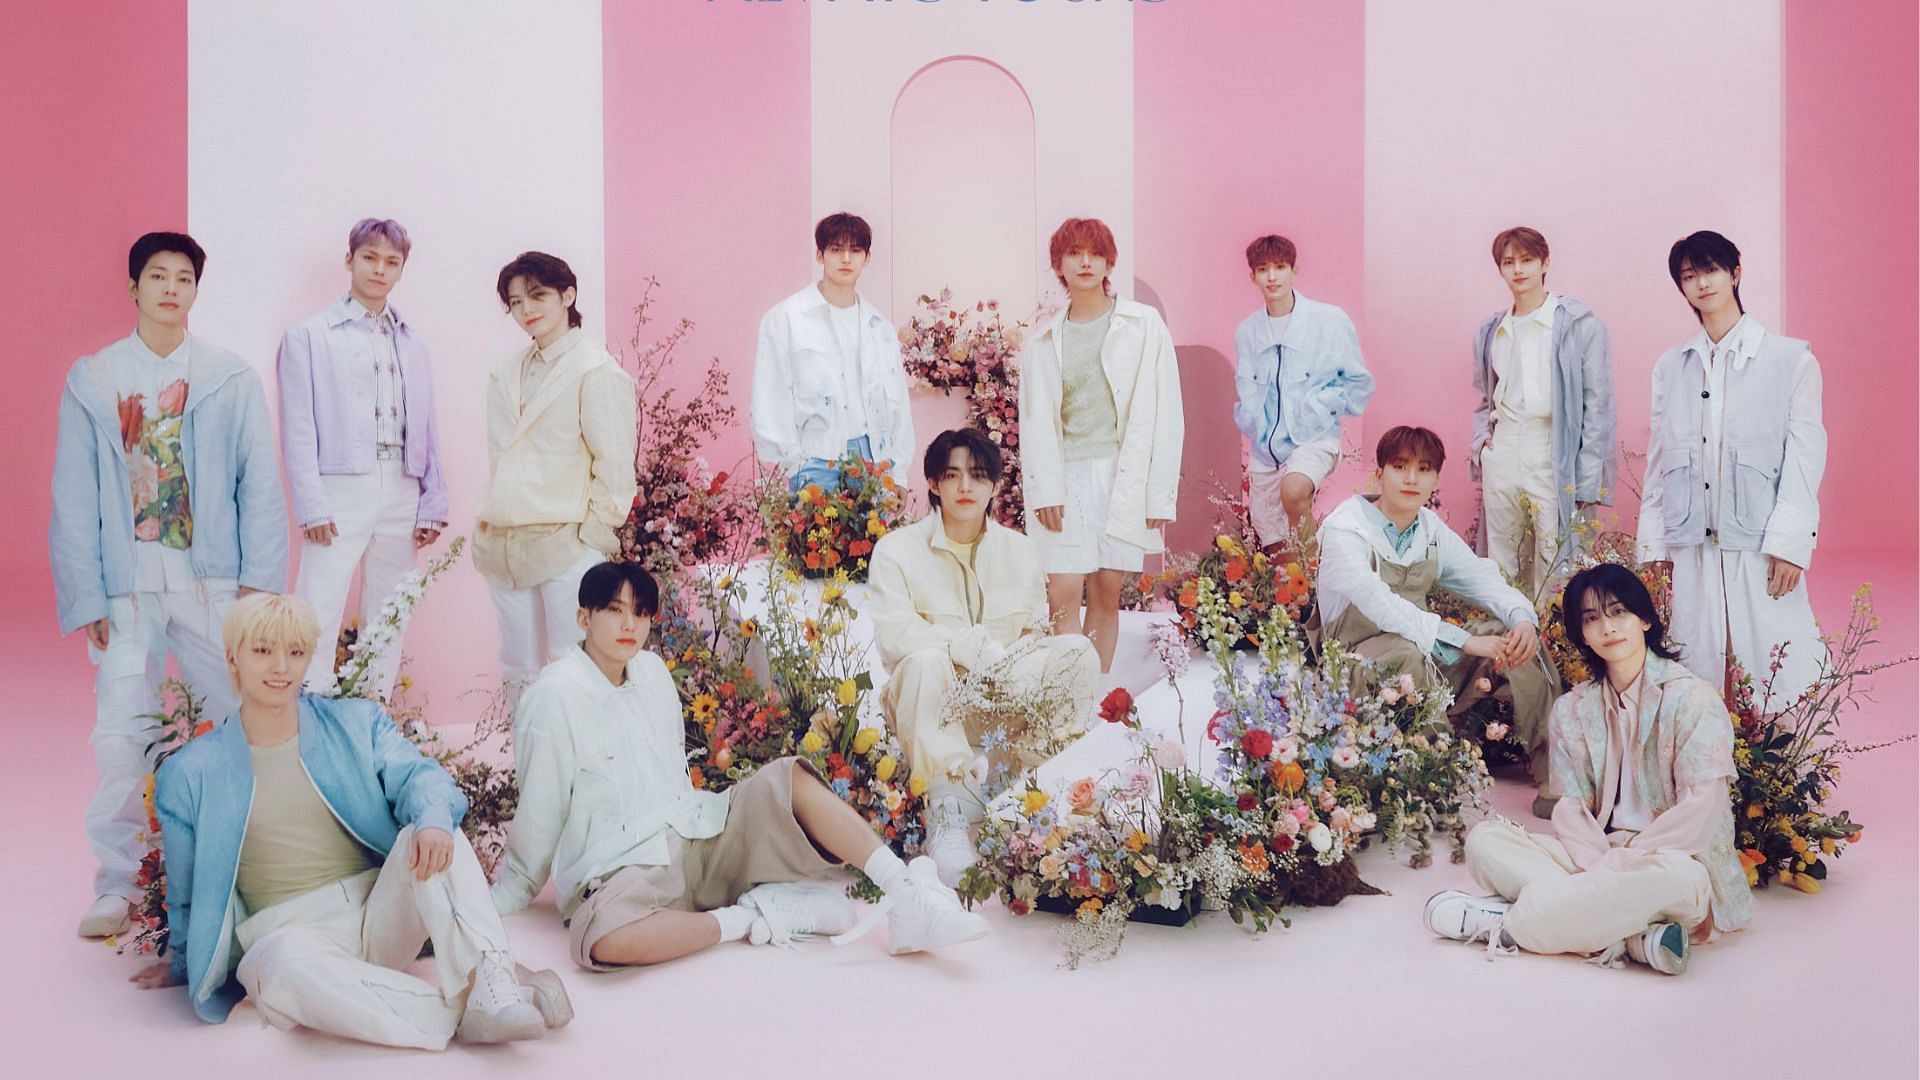 “We are going to get another Japanese masterpiece”: Carats rejoice as ...